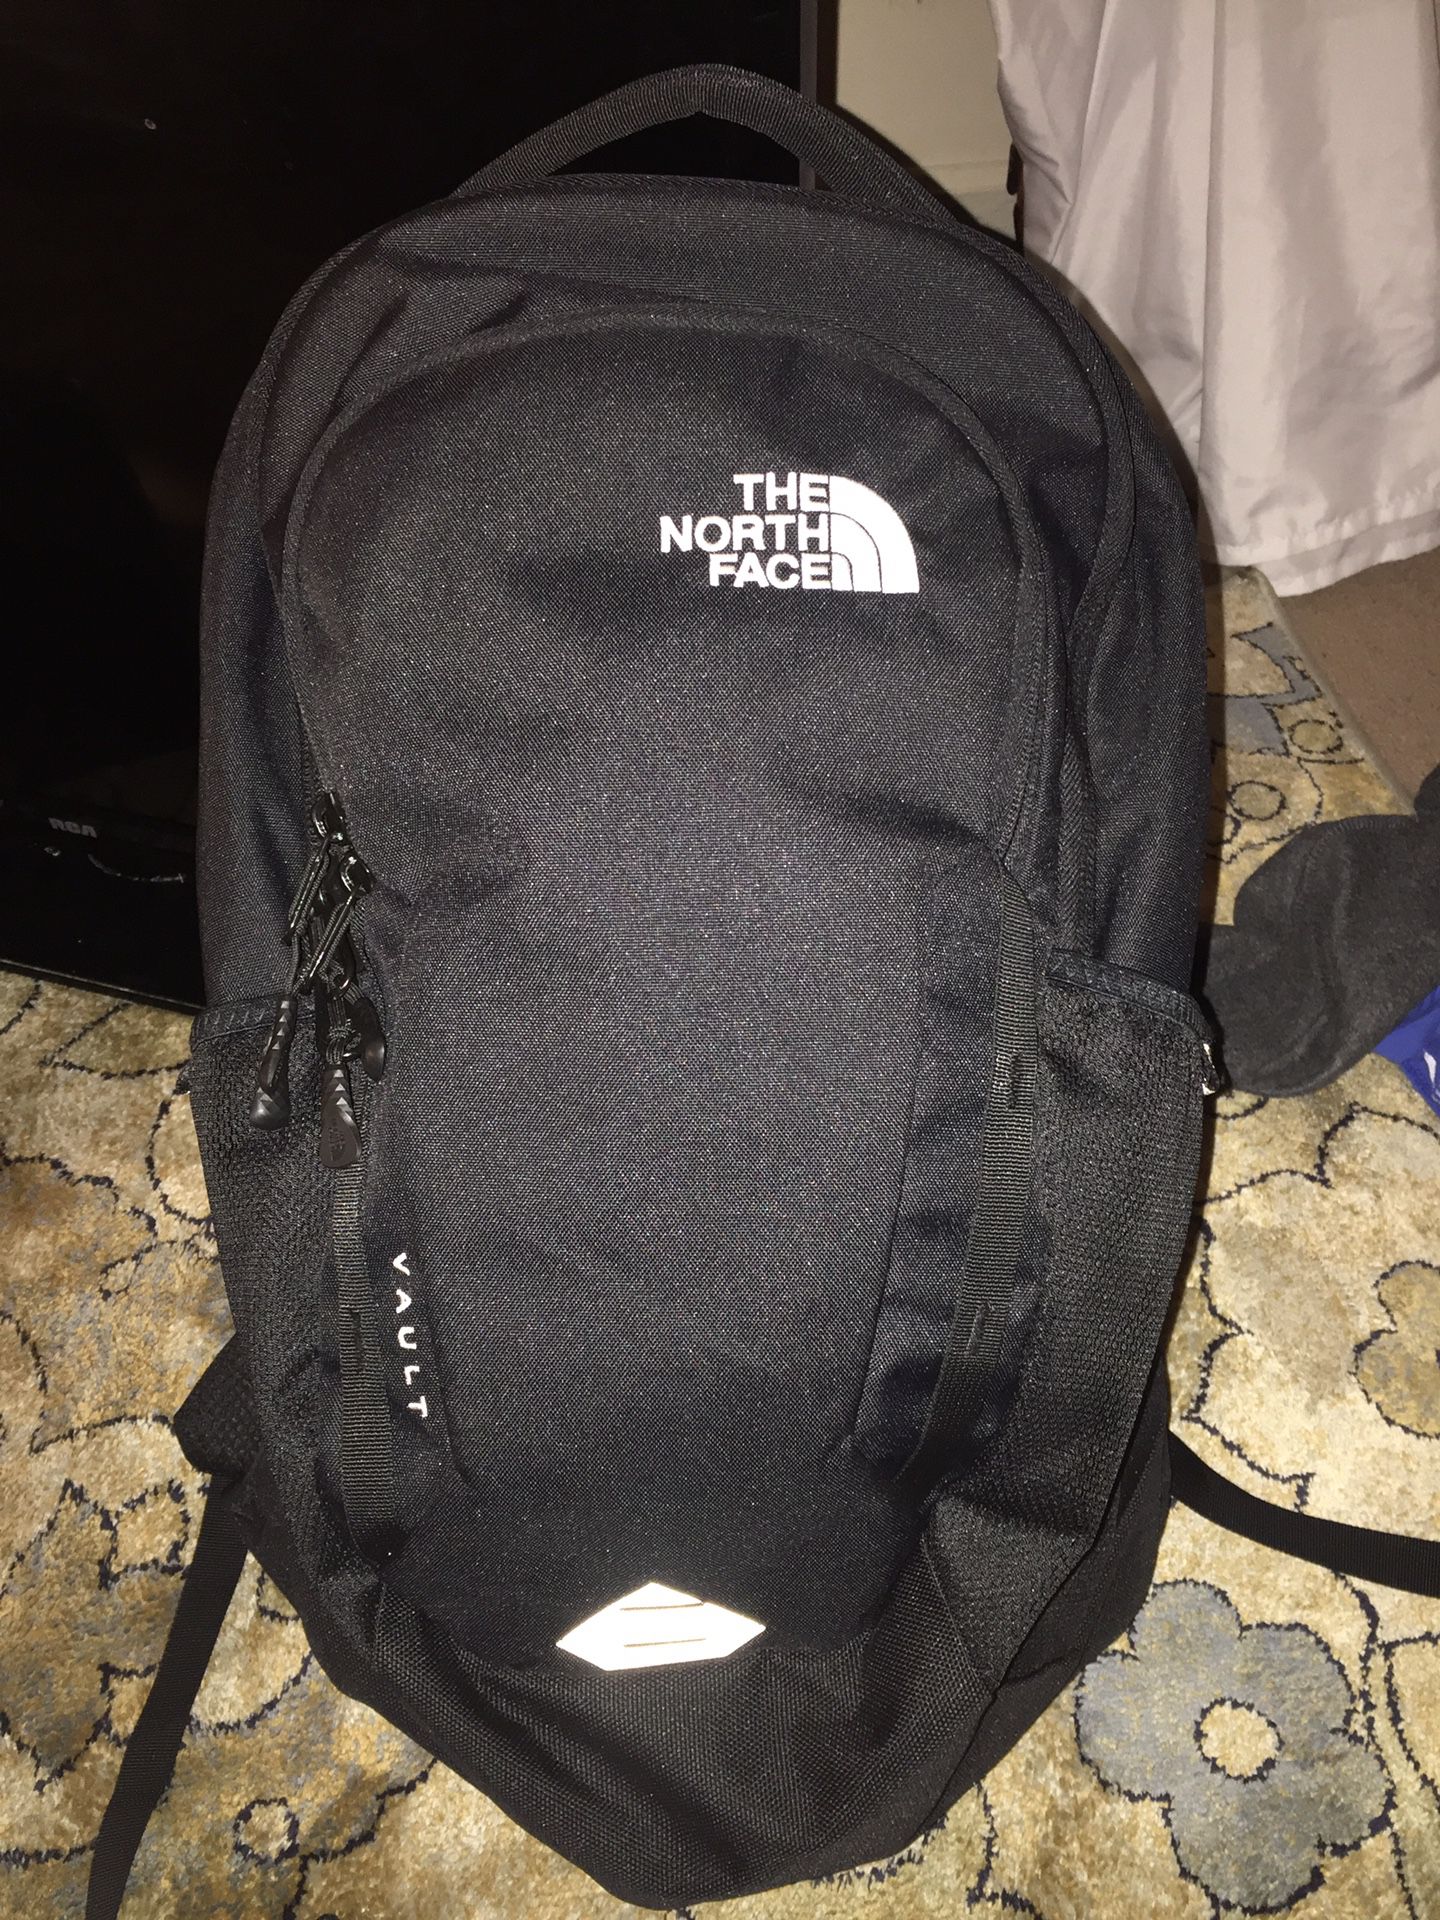 The north face book-bag